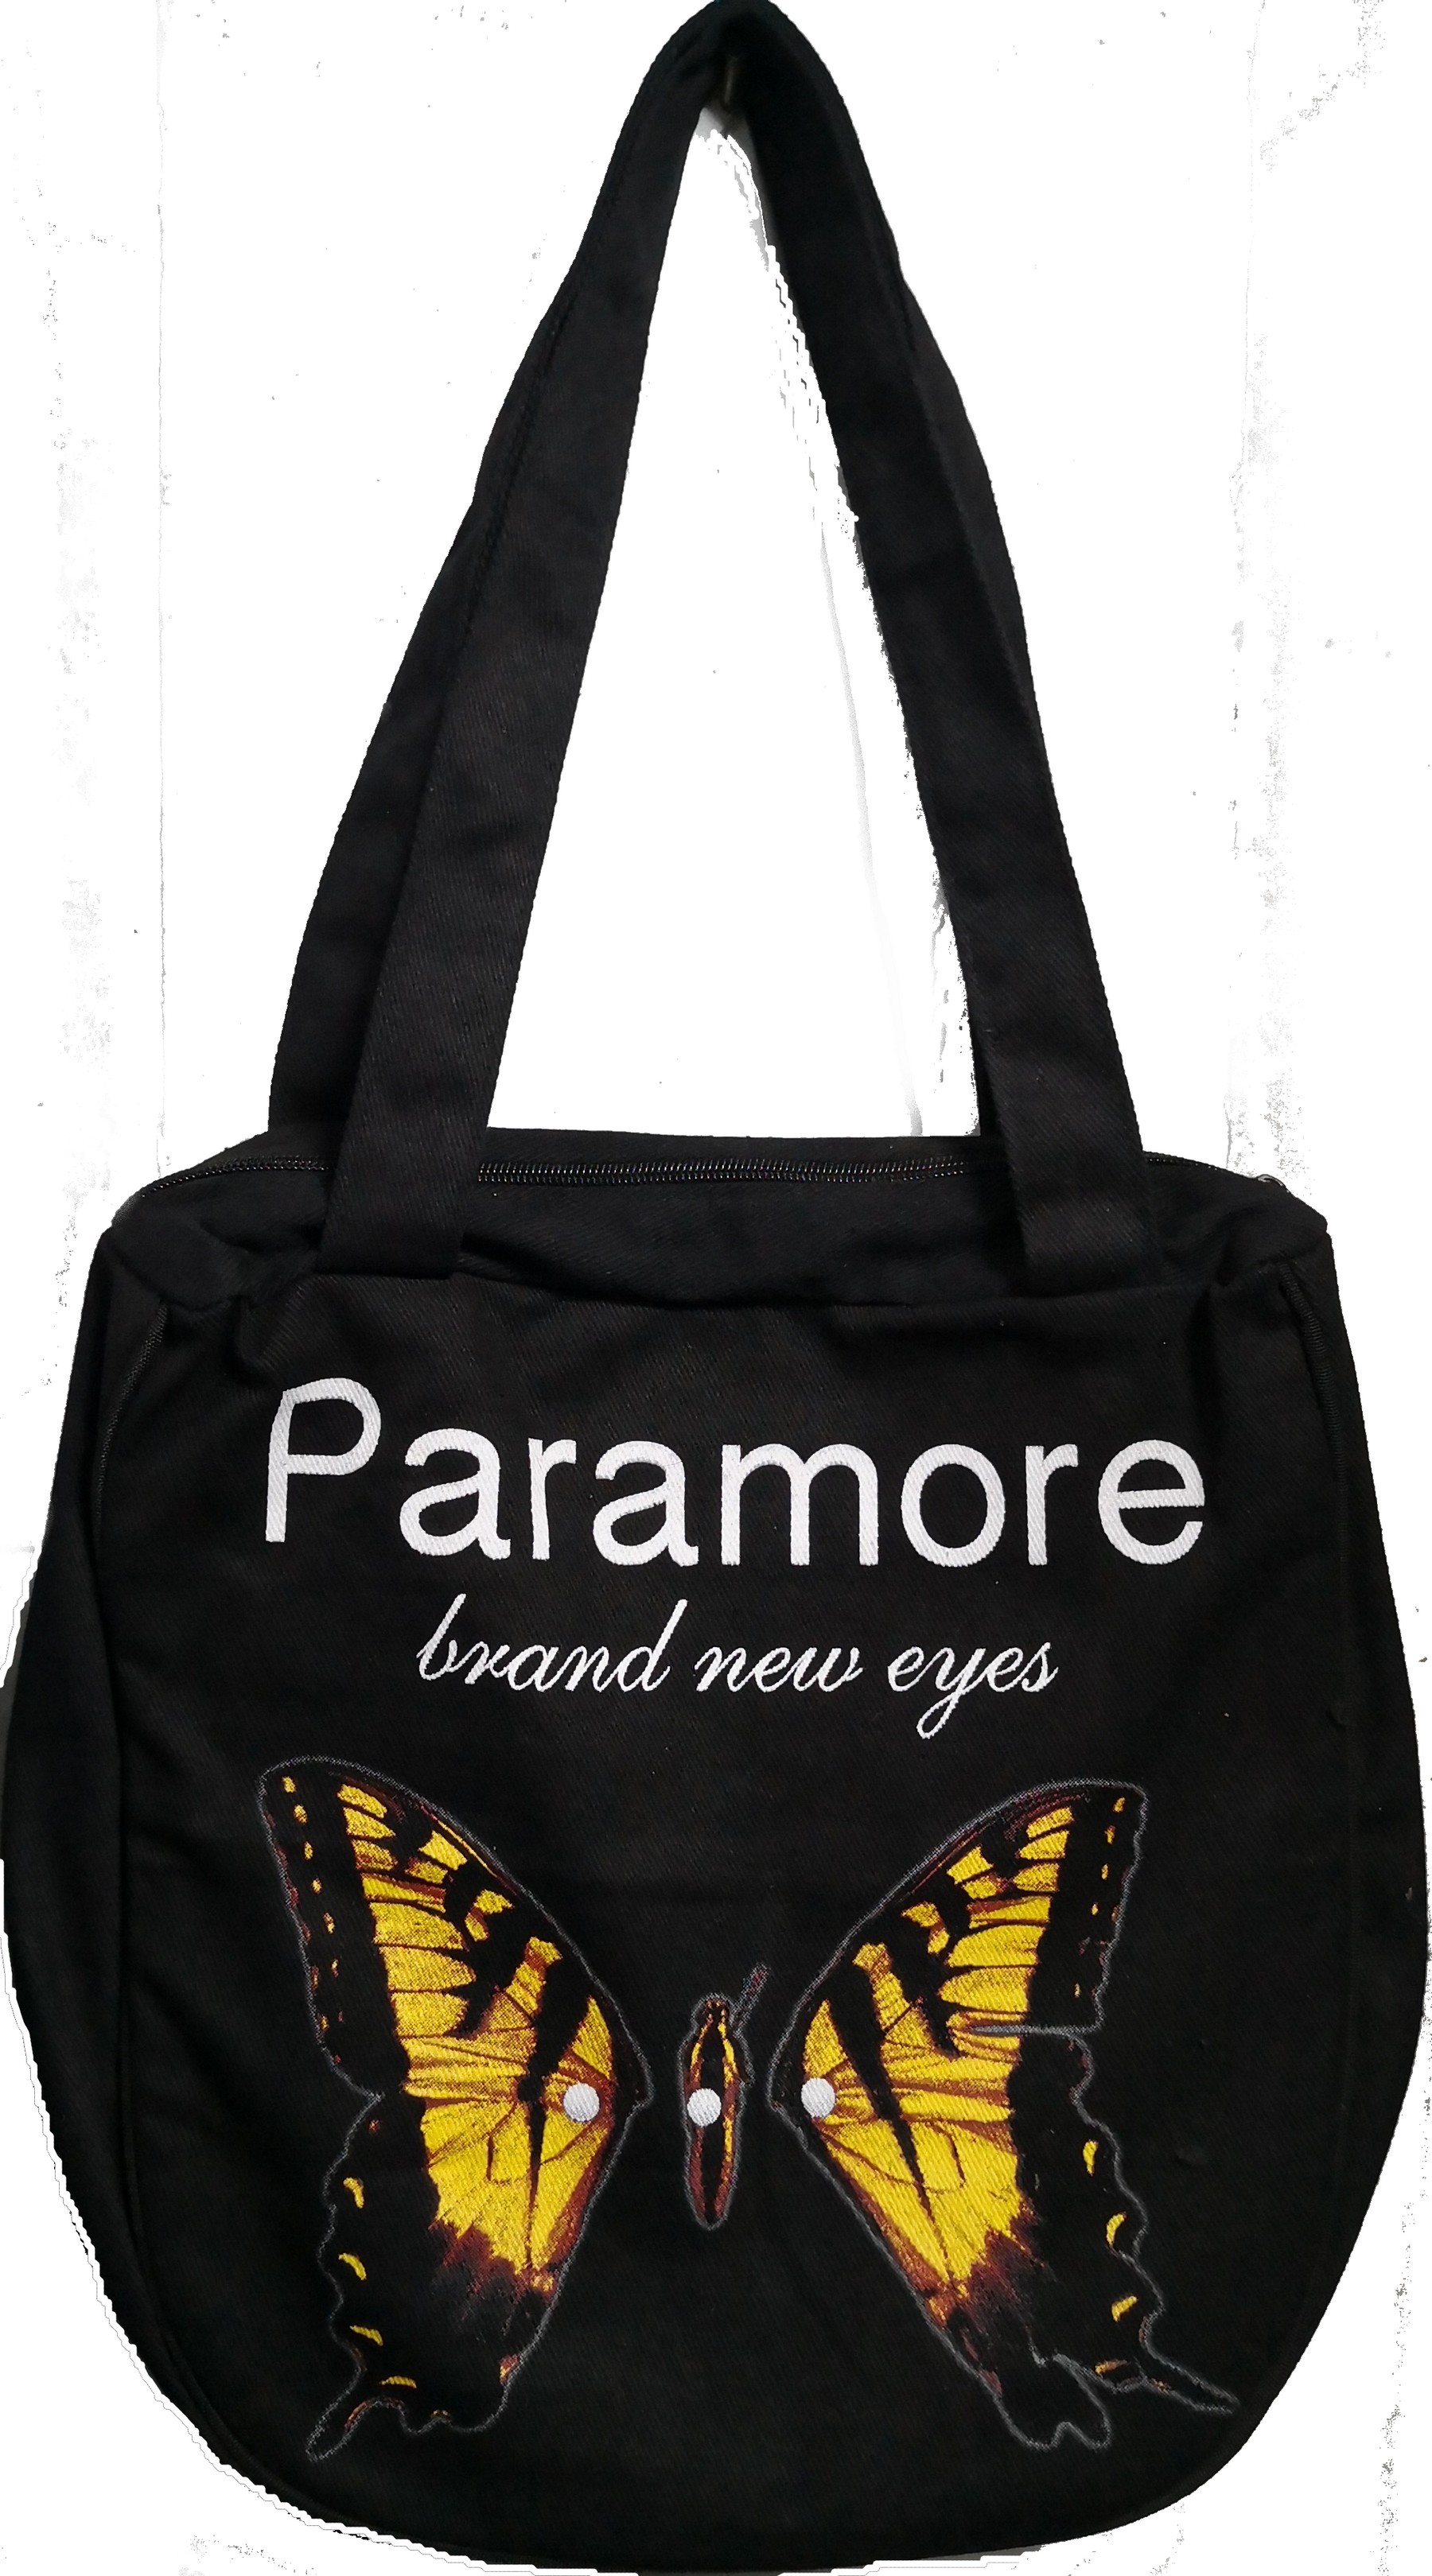 Paramore crop top paramore shirt brand new eyes album butterfly